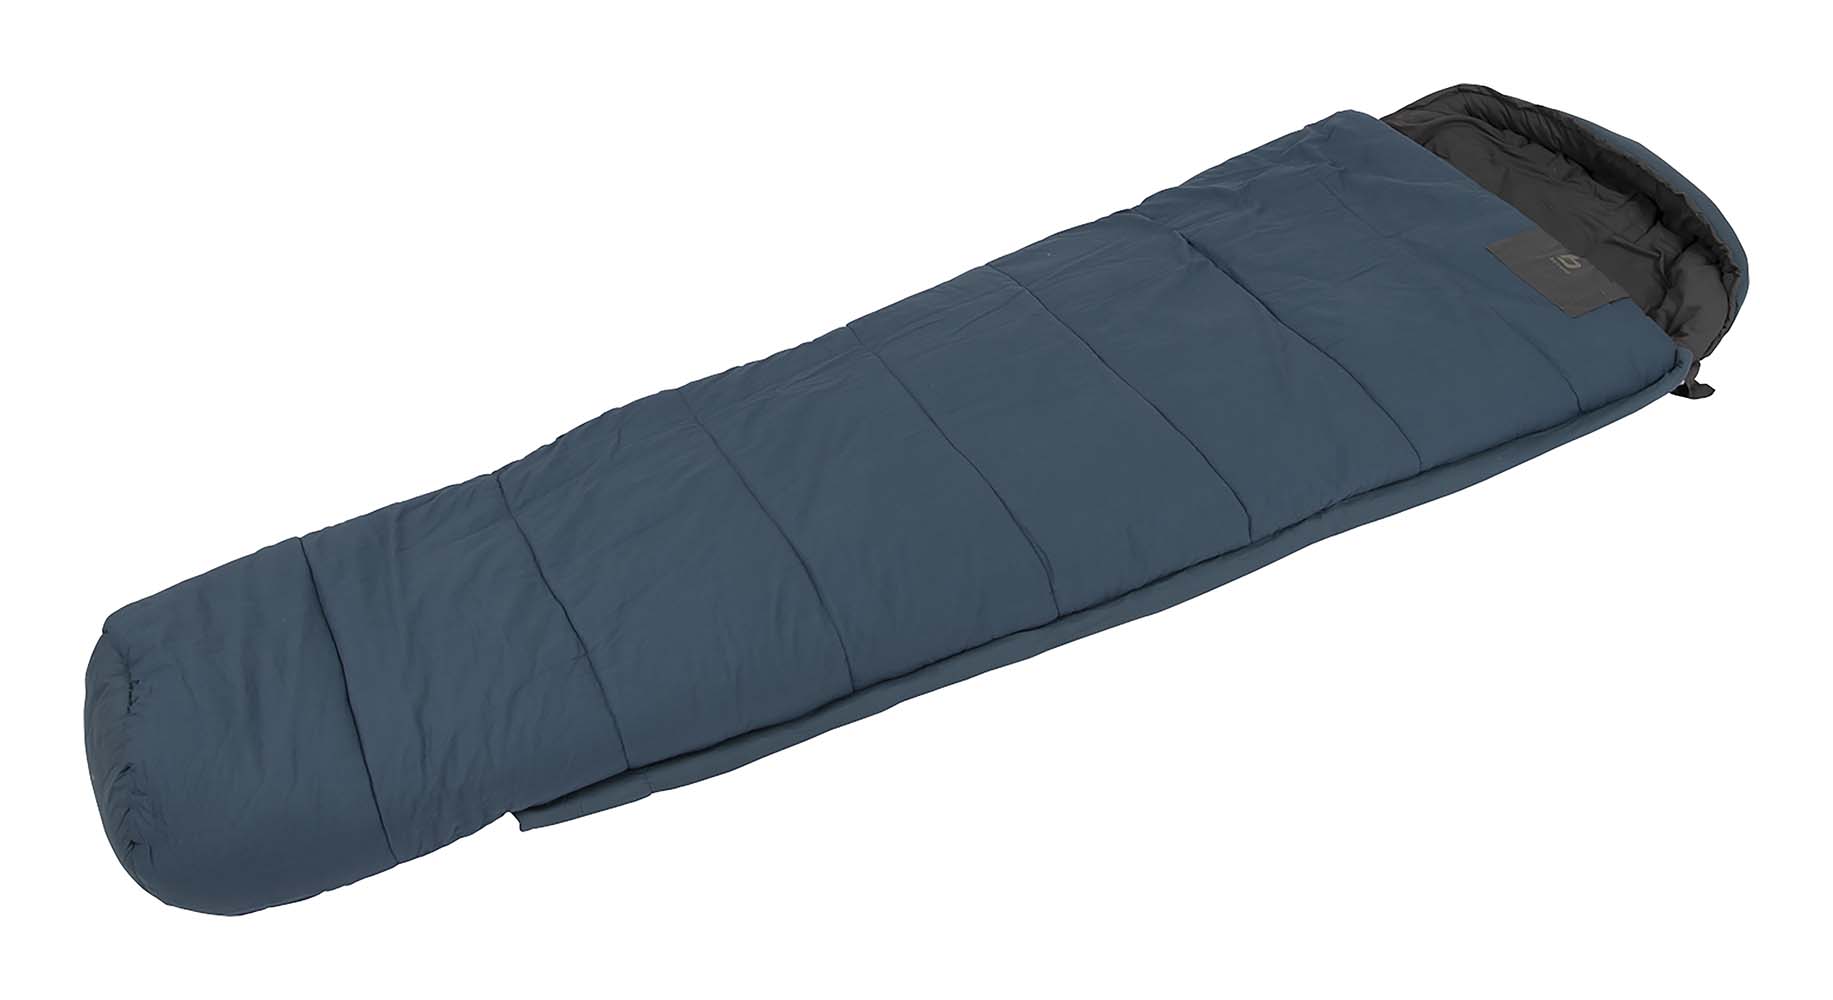 3605888 "A luxurious mummy sleeping bag. A 'warm side of extra soft brushed polyester. A 'cool lace' made of soft cotton. The sleeping bag can be used both straight and inside out. In addition, the sleeping bag is provided with extra insulation by 2 layers in total 300g/m² high quality microfiber siliconized padding. Comfortable from about 4 degrees, usable from about -4 degrees."